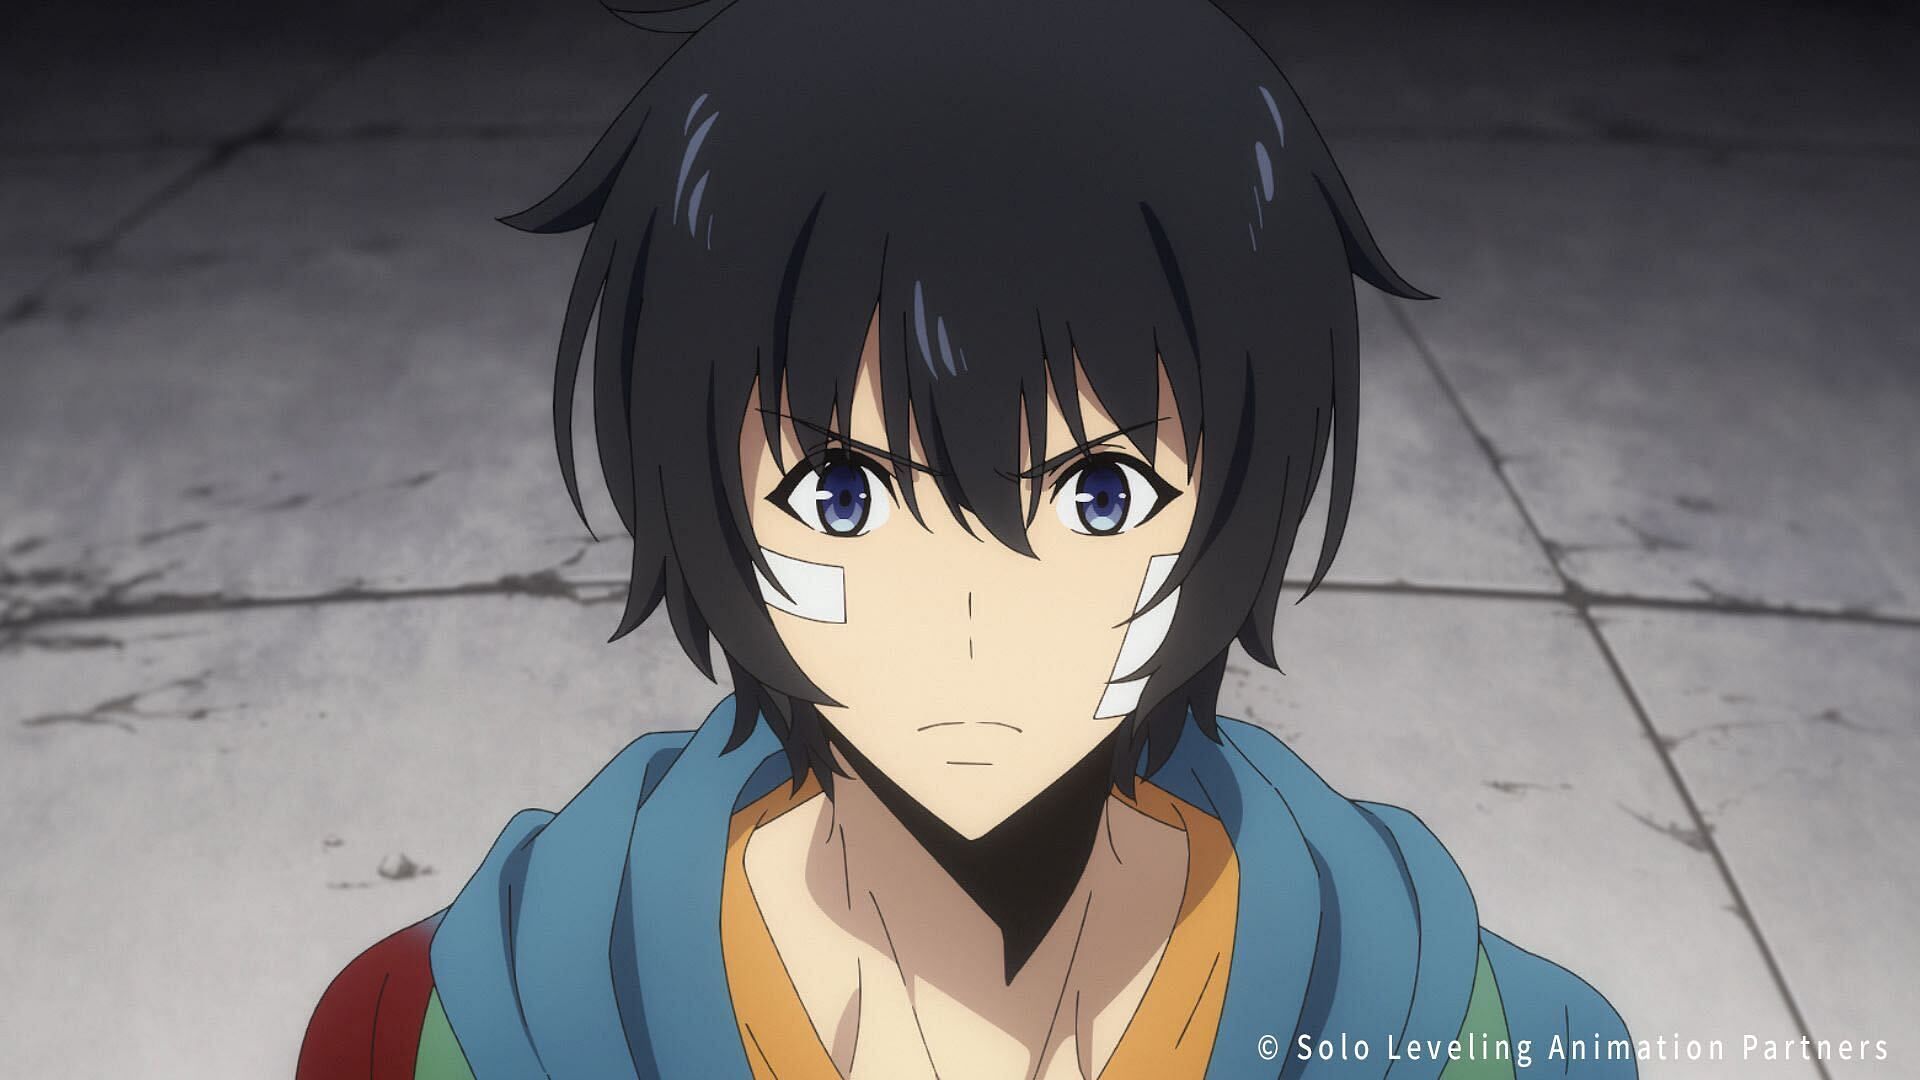 Sung Jinwoo as seen in Solo Leveling (Image via A-1 Pictures)